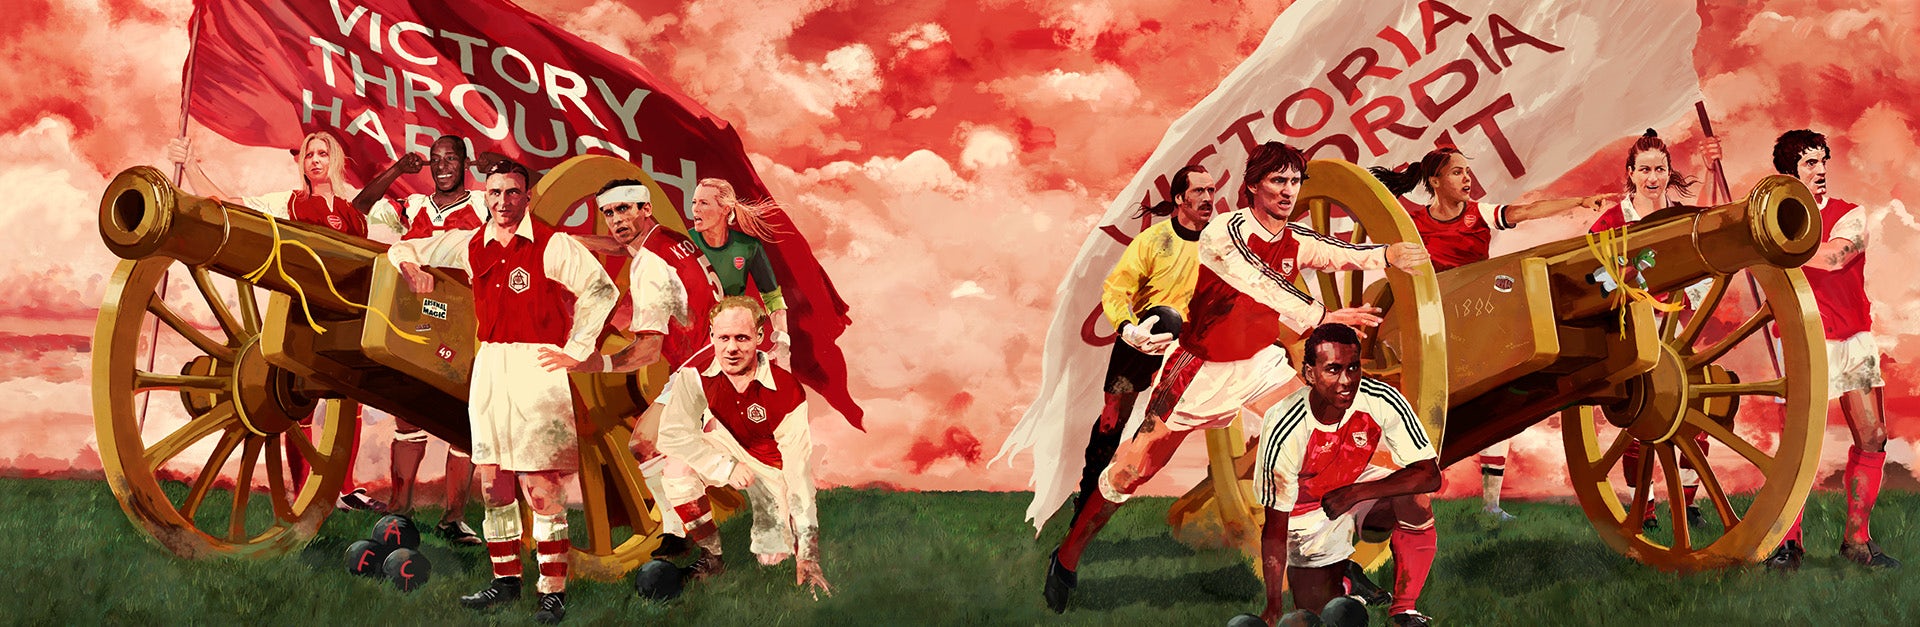 Image by Reuben Dangoor featuring illustrations of players from Arsenal history stood in a field next to cannons and flags